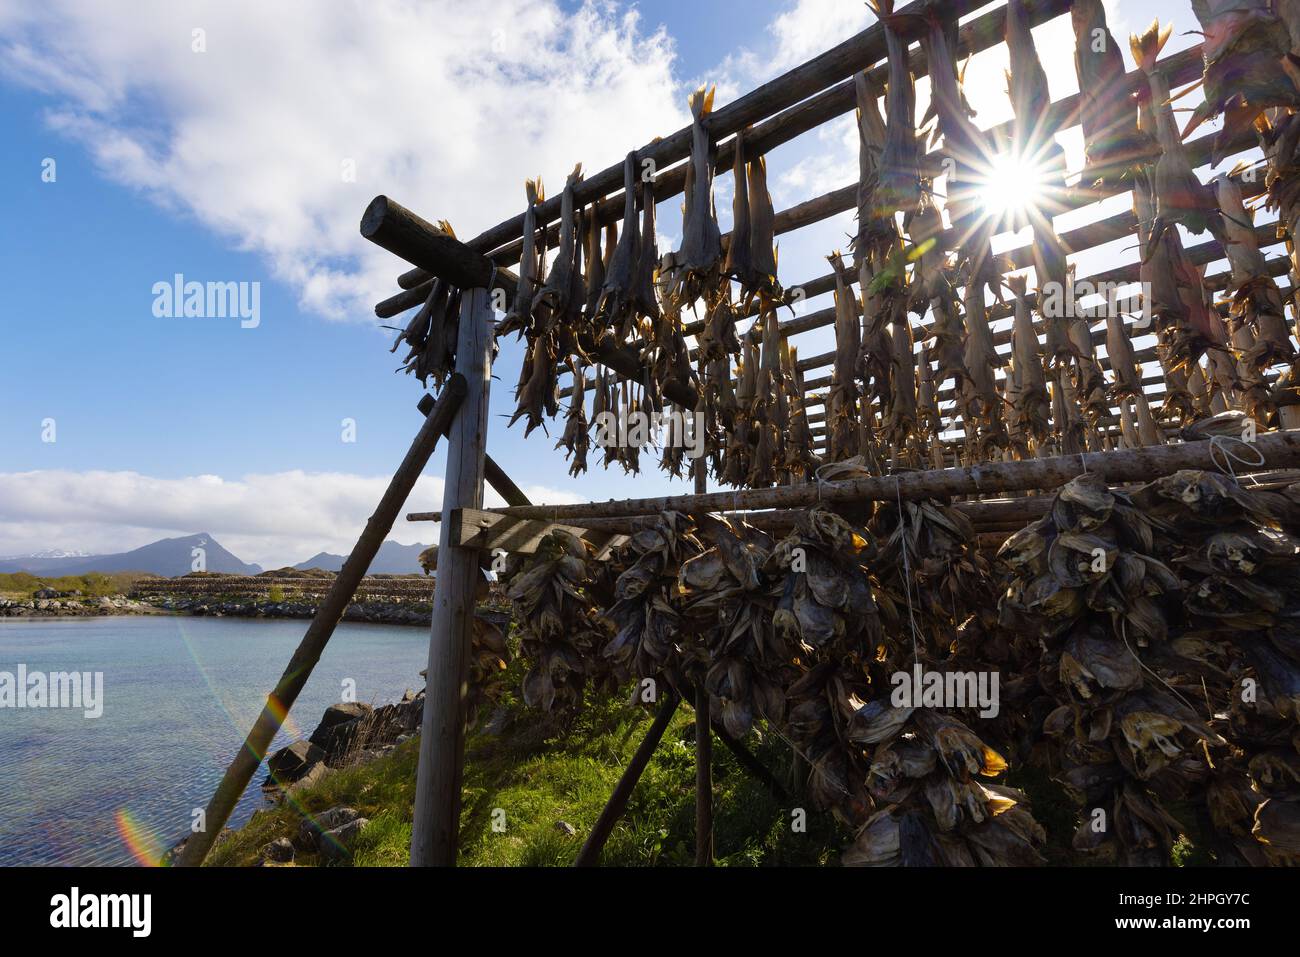 Stockfish, Norway - Stock Image - C009/7686 - Science Photo Library